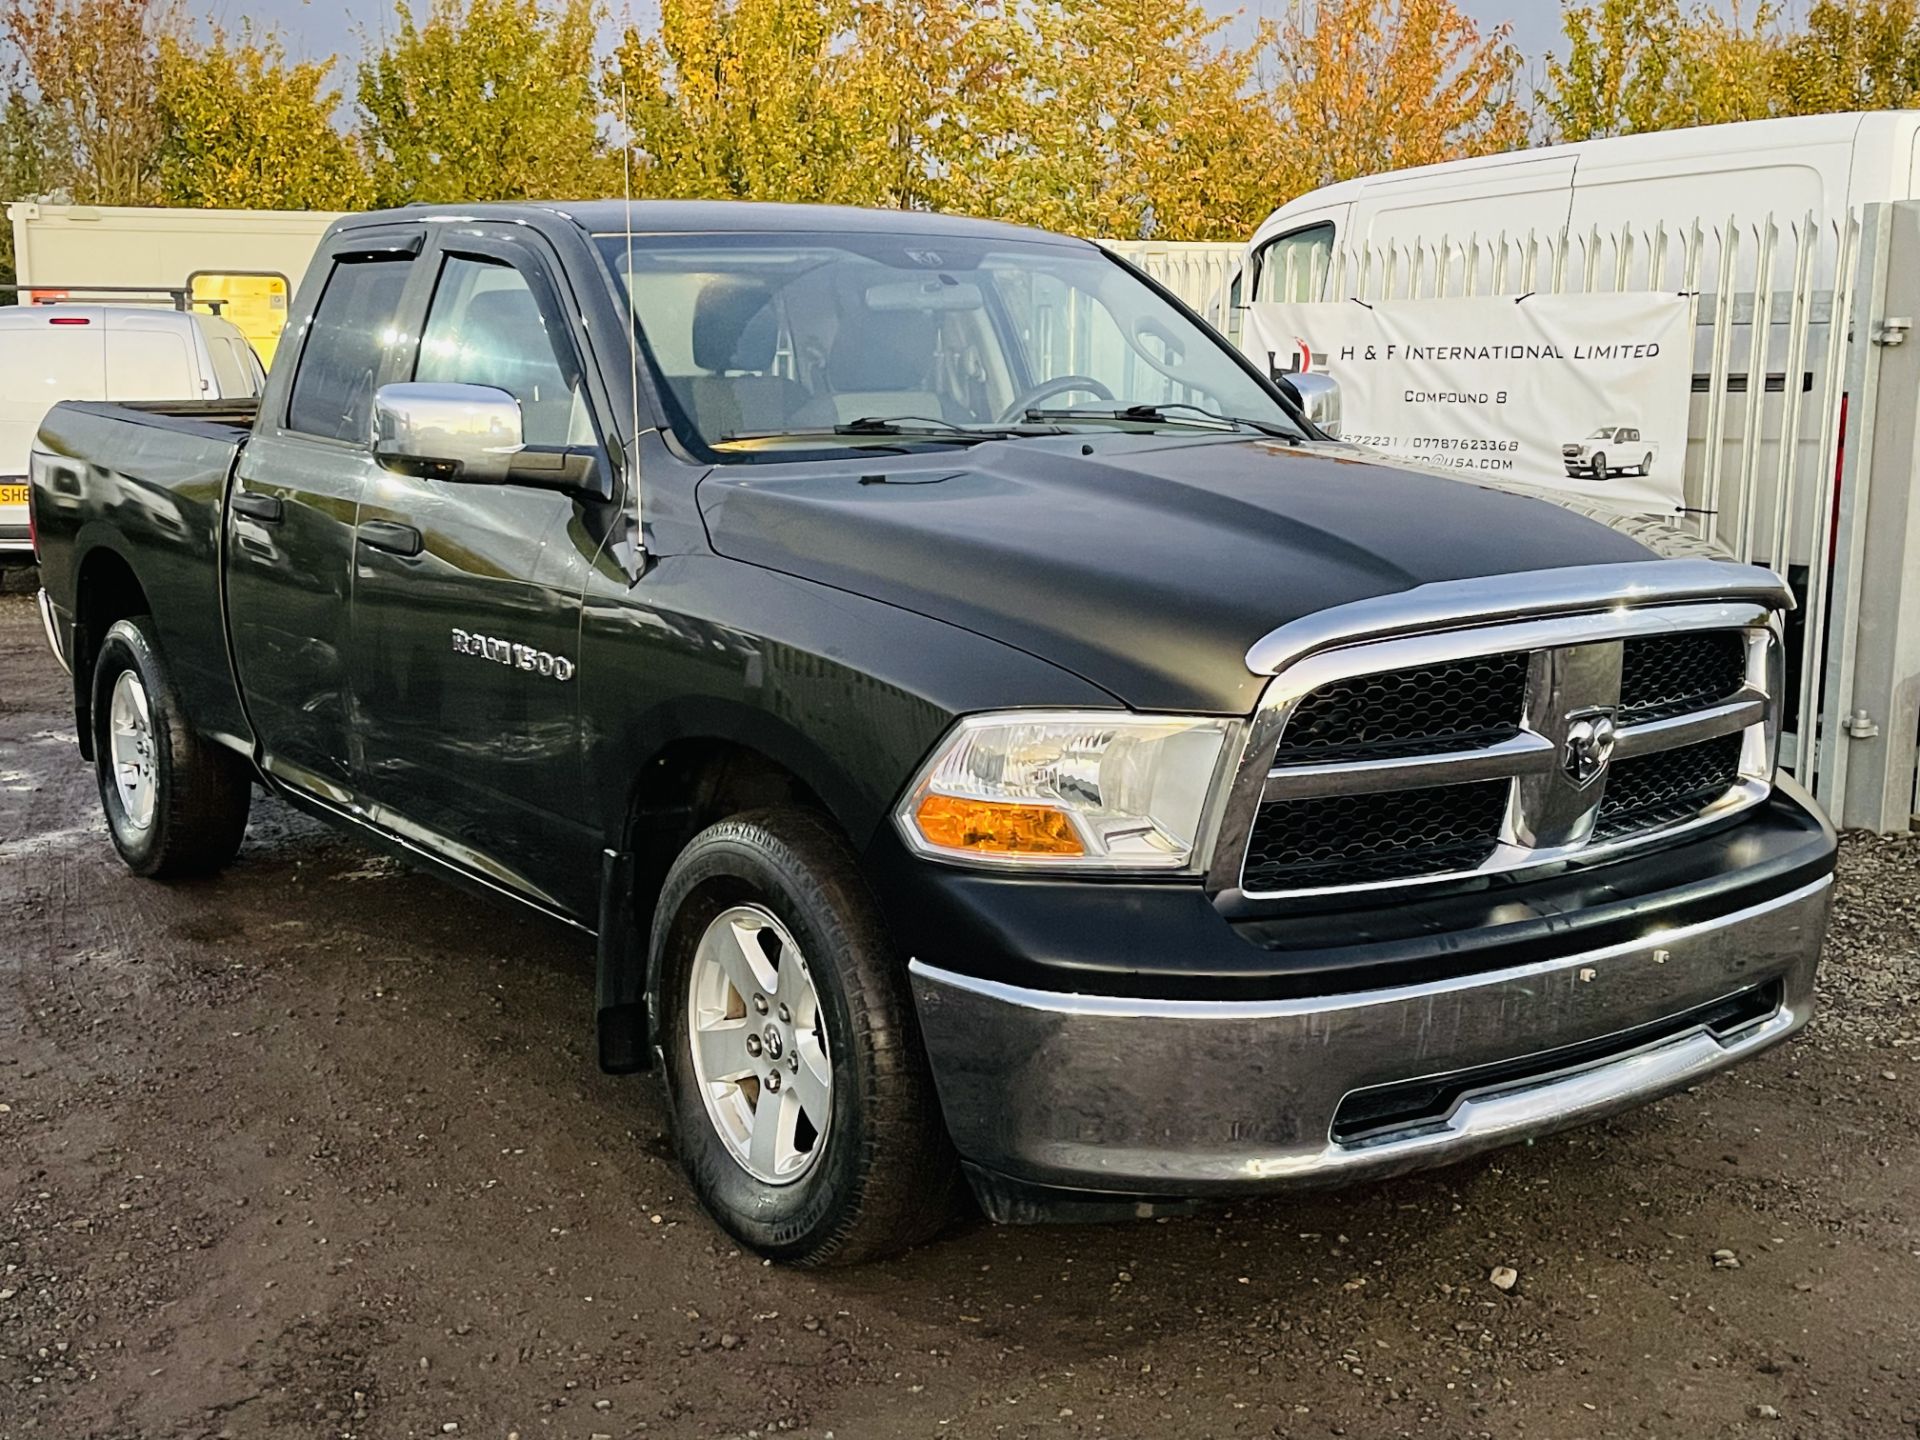 Dodge Ram 4.7 V8 1500 ST 4WD ' 2012 Year ' A/C - Cruise Control - 6 Seats - Chrome Pack - Image 6 of 27